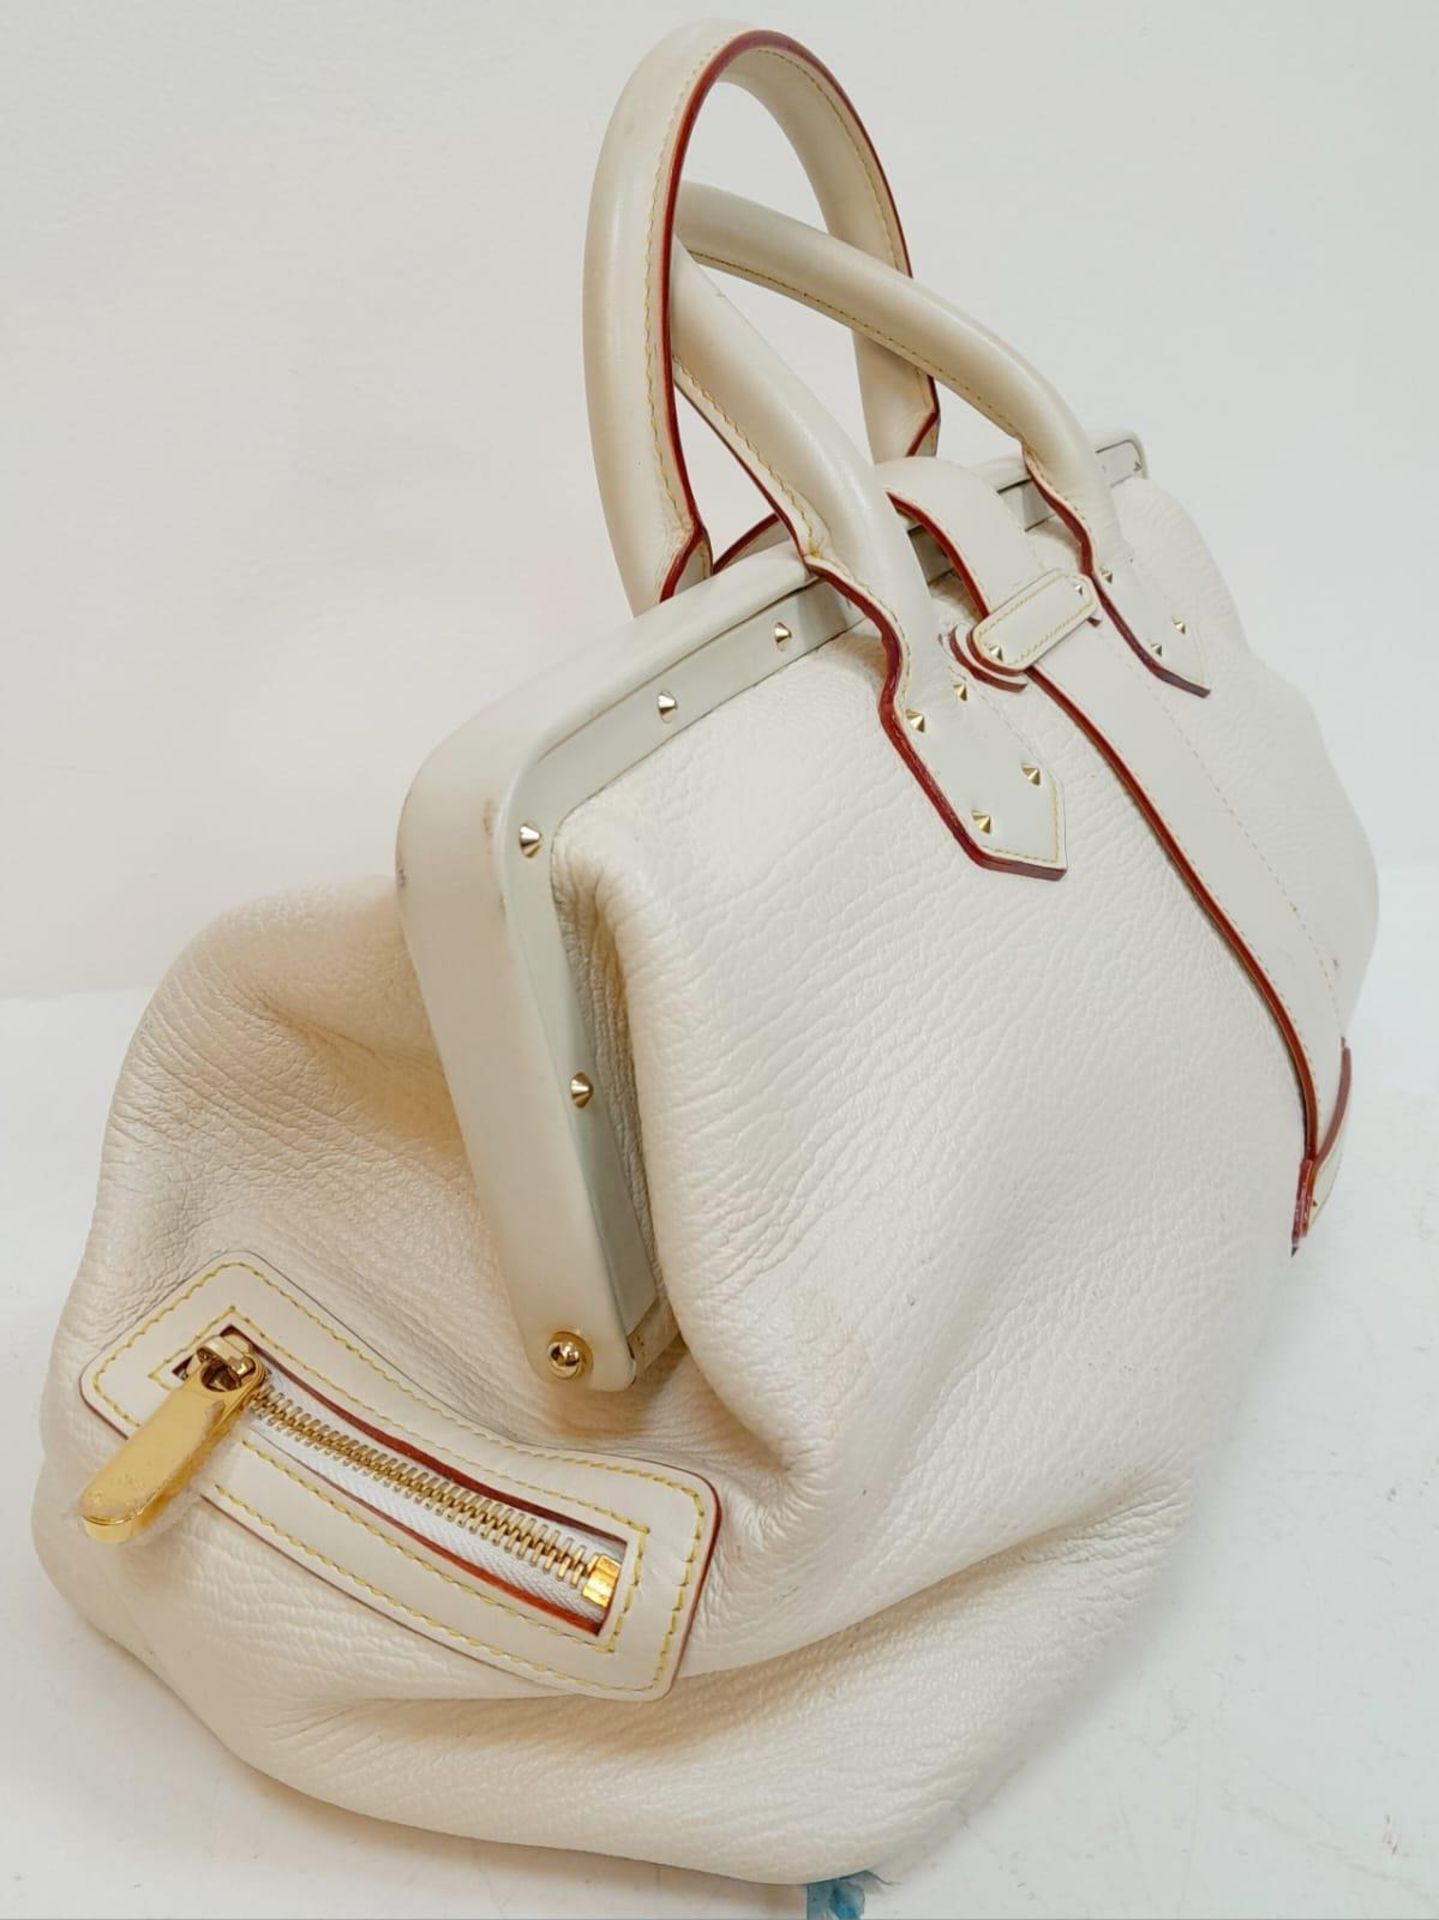 A Louis Vuitton Manhattan PM Suhali Leather Handbag. Soft white textured leather exterior with - Image 3 of 8